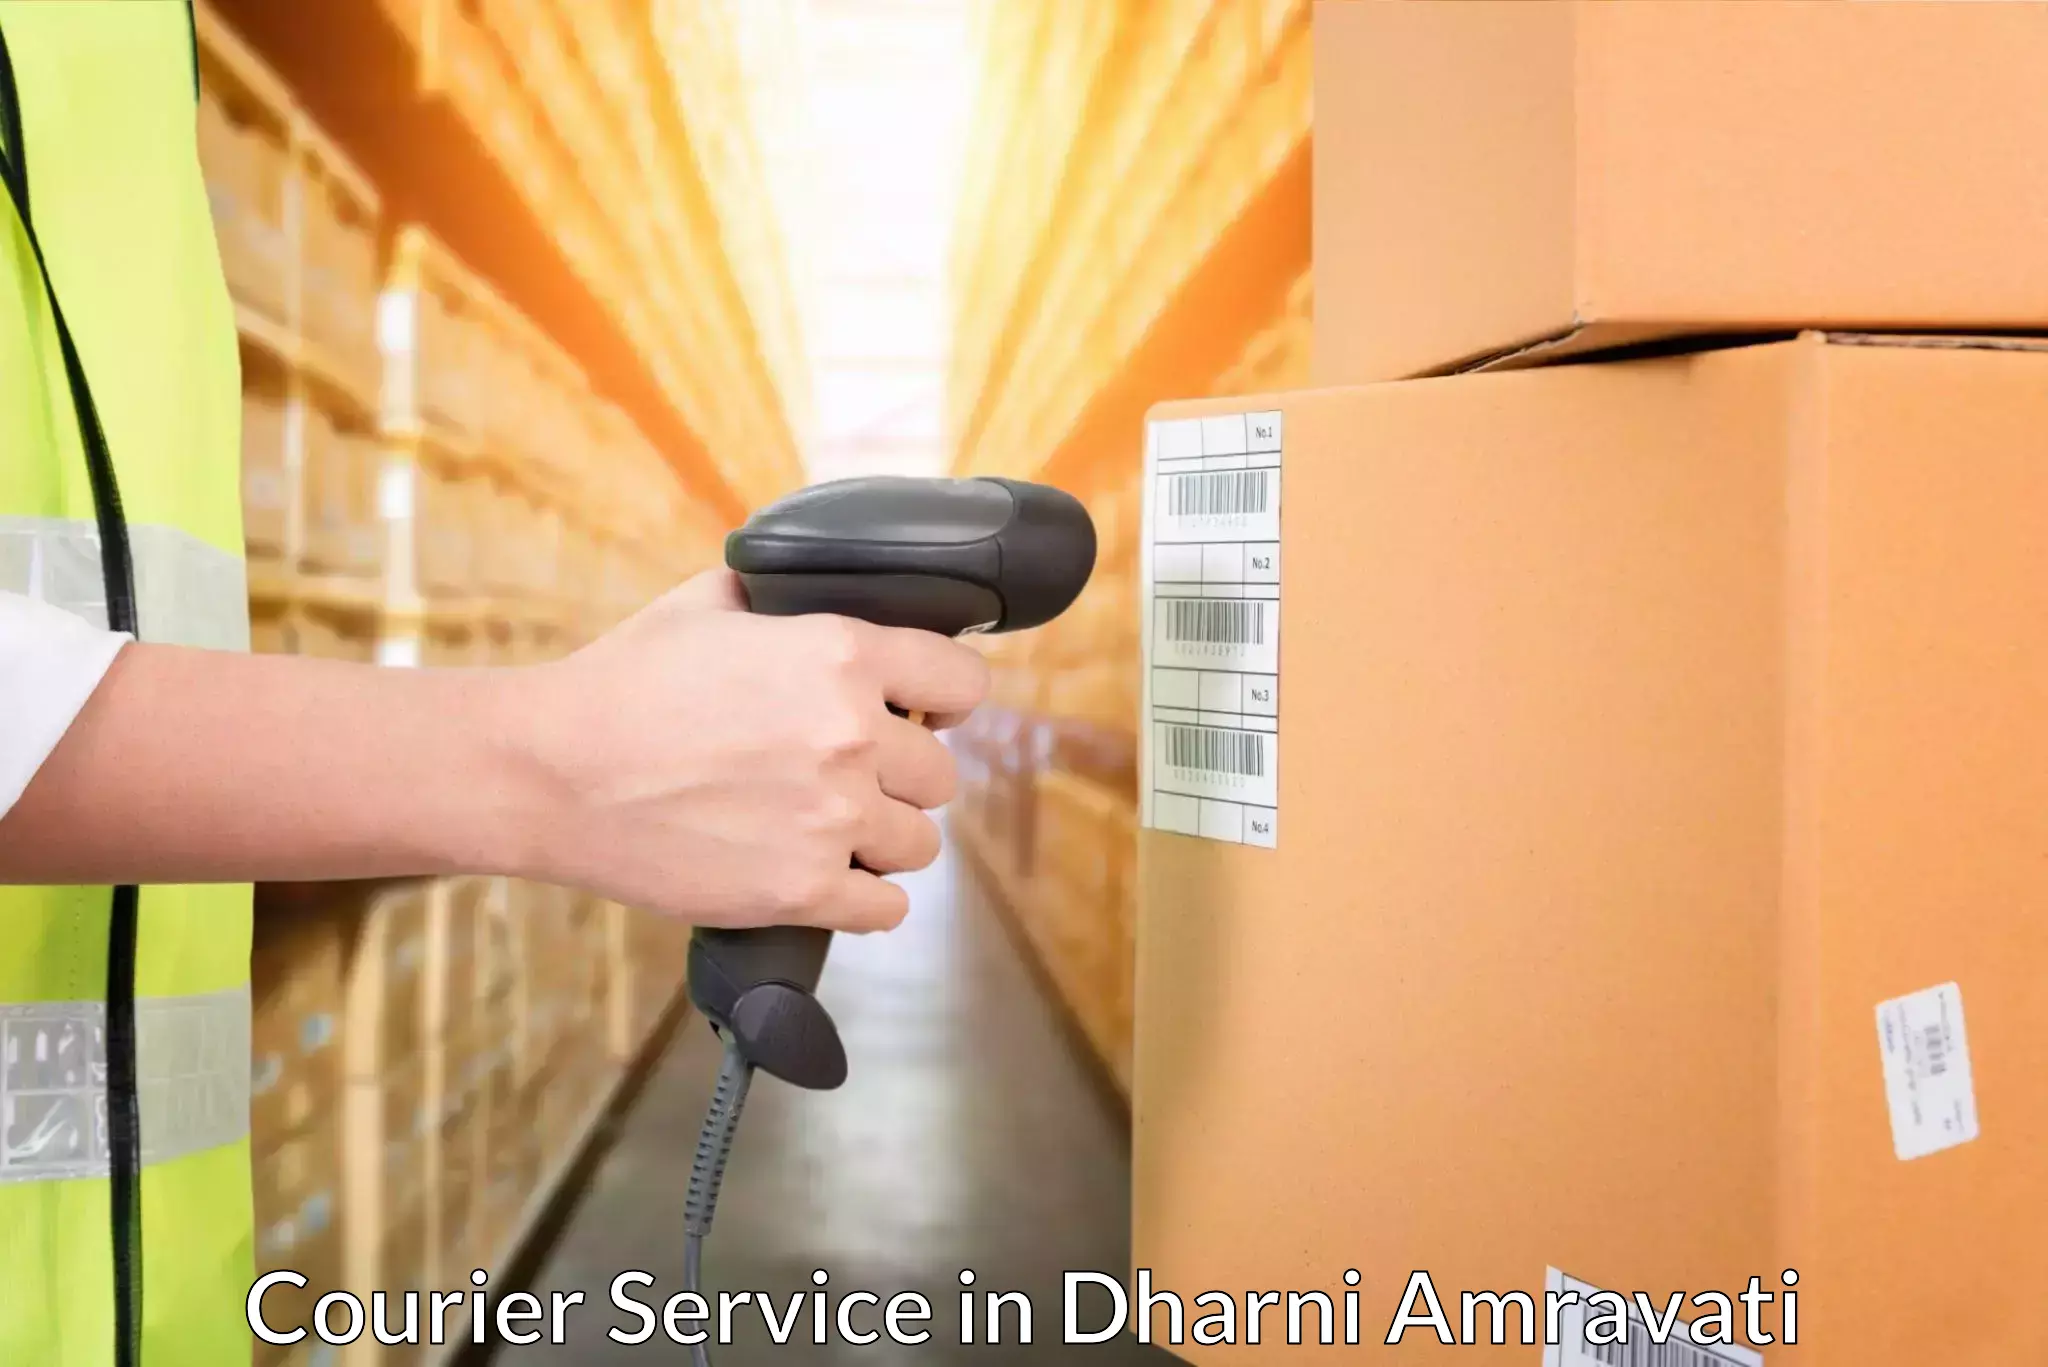 Customer-friendly courier services in Dharni Amravati